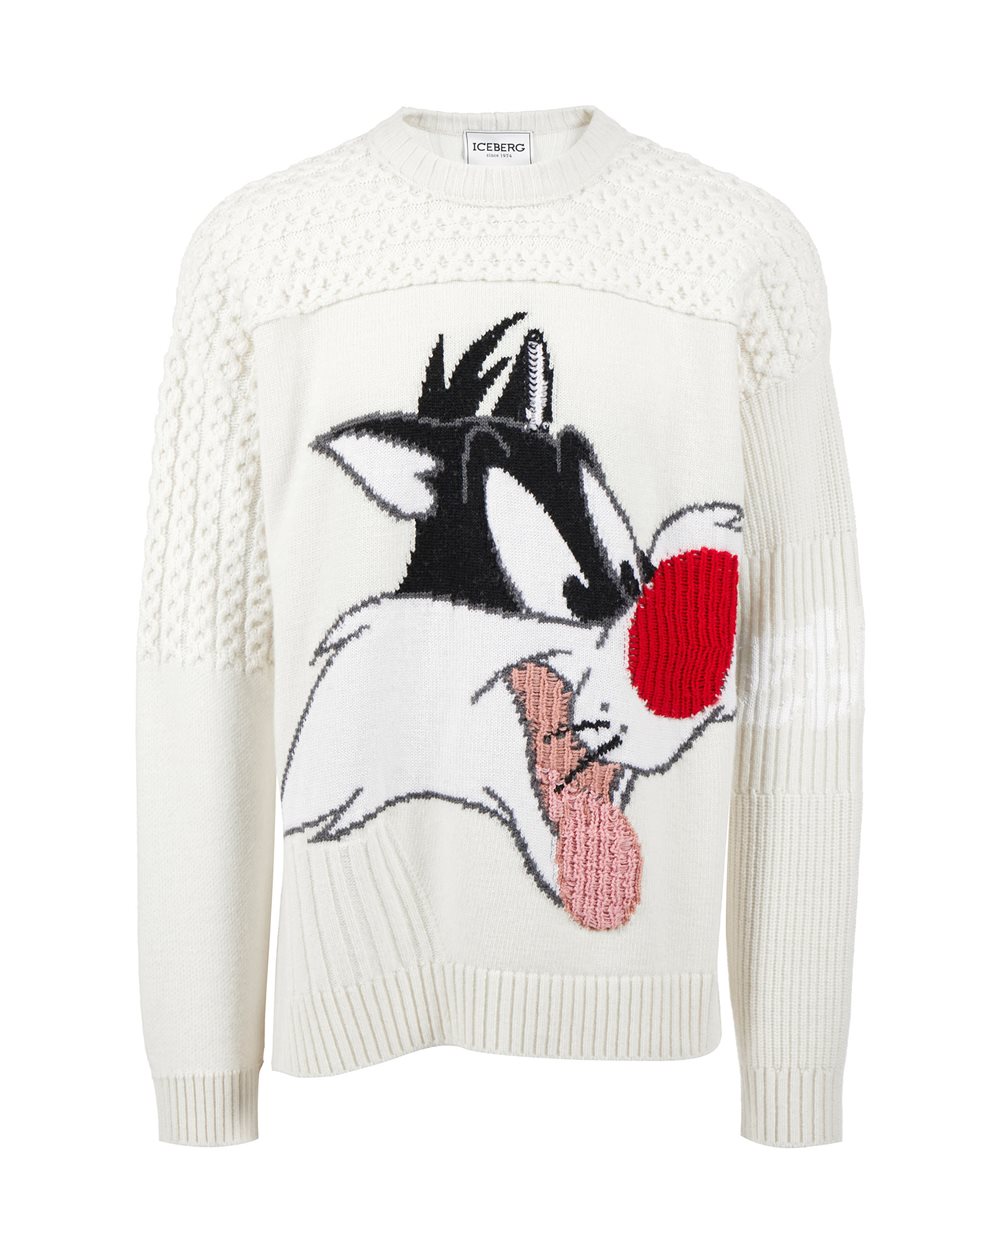 Sweater with logo and cartoon detail - carosello gift guide uomo | Iceberg - Official Website